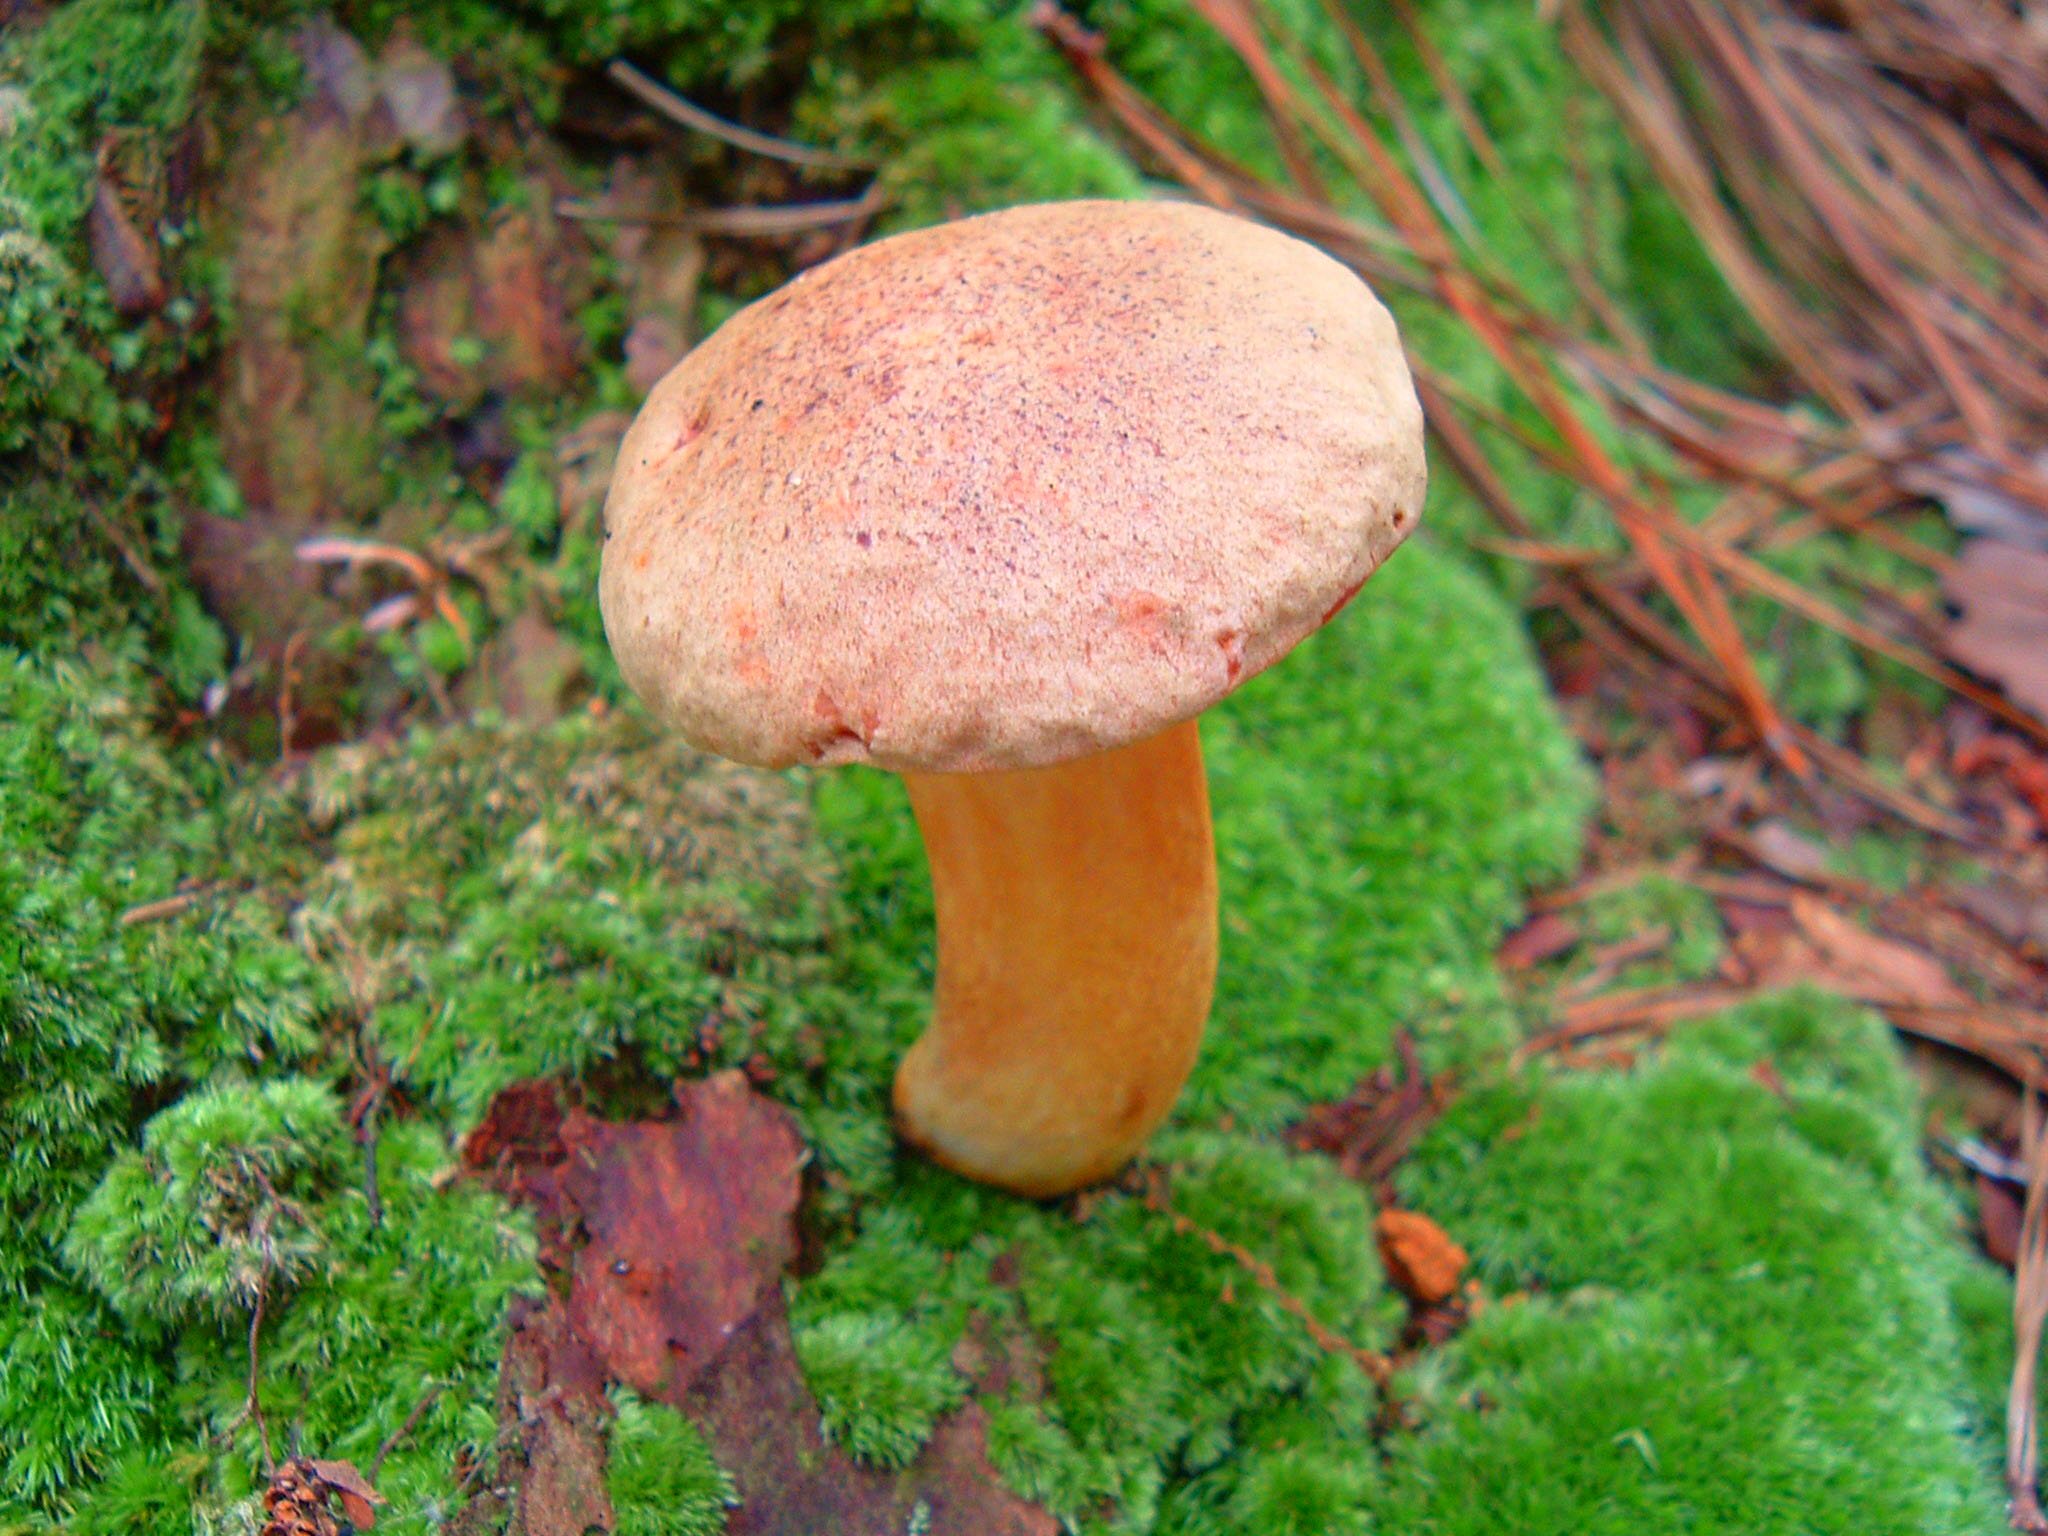 a mushroom growing in the mossy ground